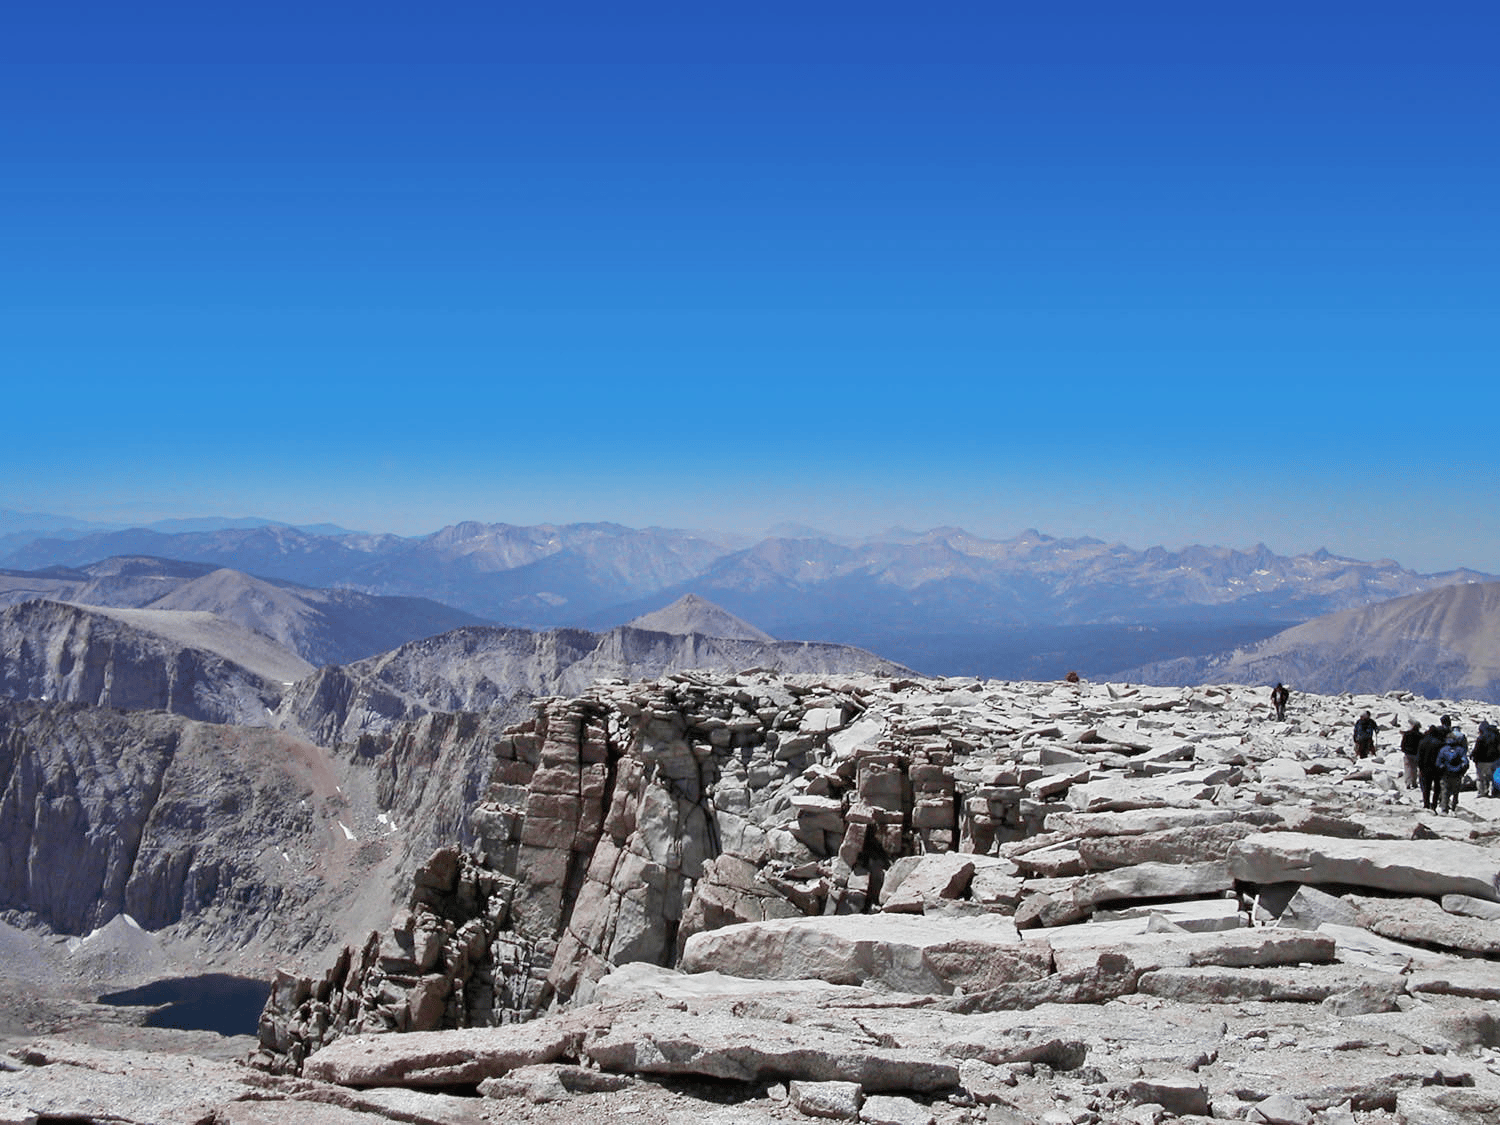 The top of Mount Whitney